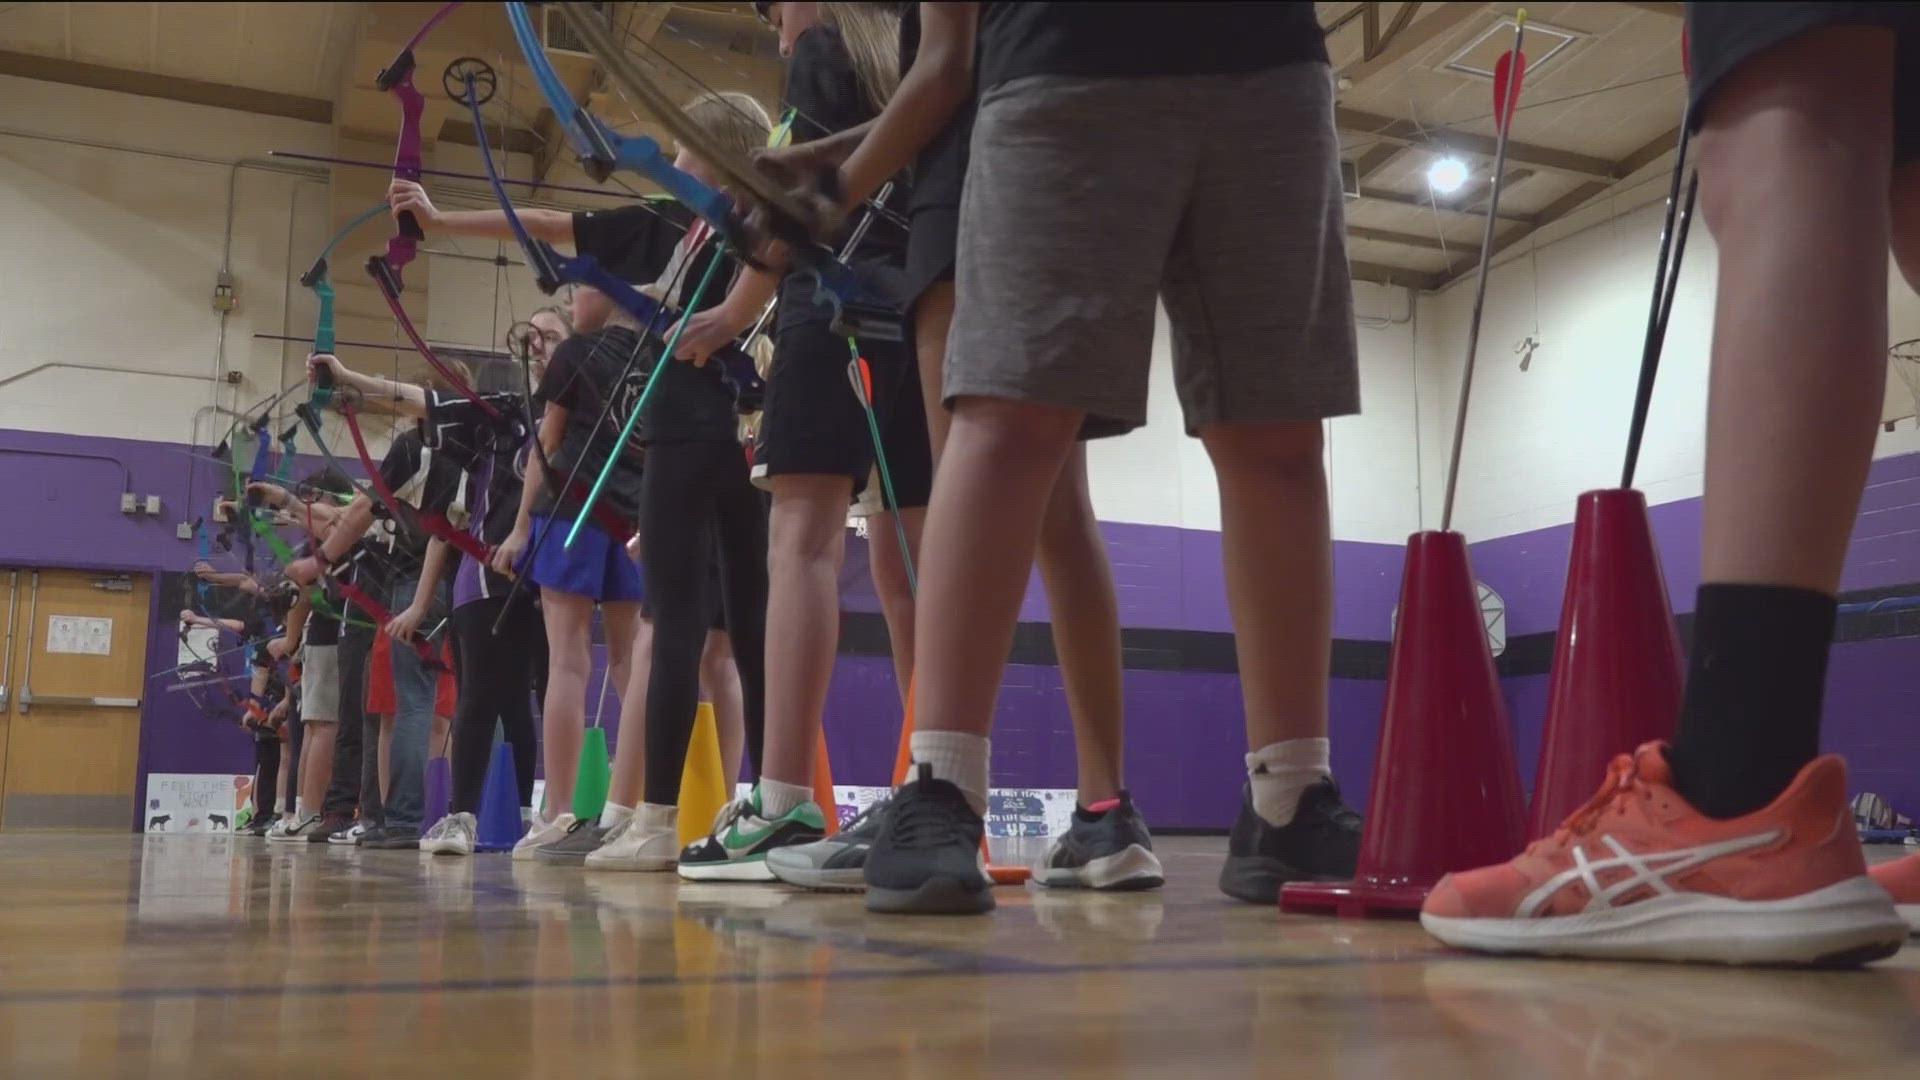 Three national championships in youth archery were earned by schools in Austin. The success in the sport is no accident, as Jeff Jones explains.